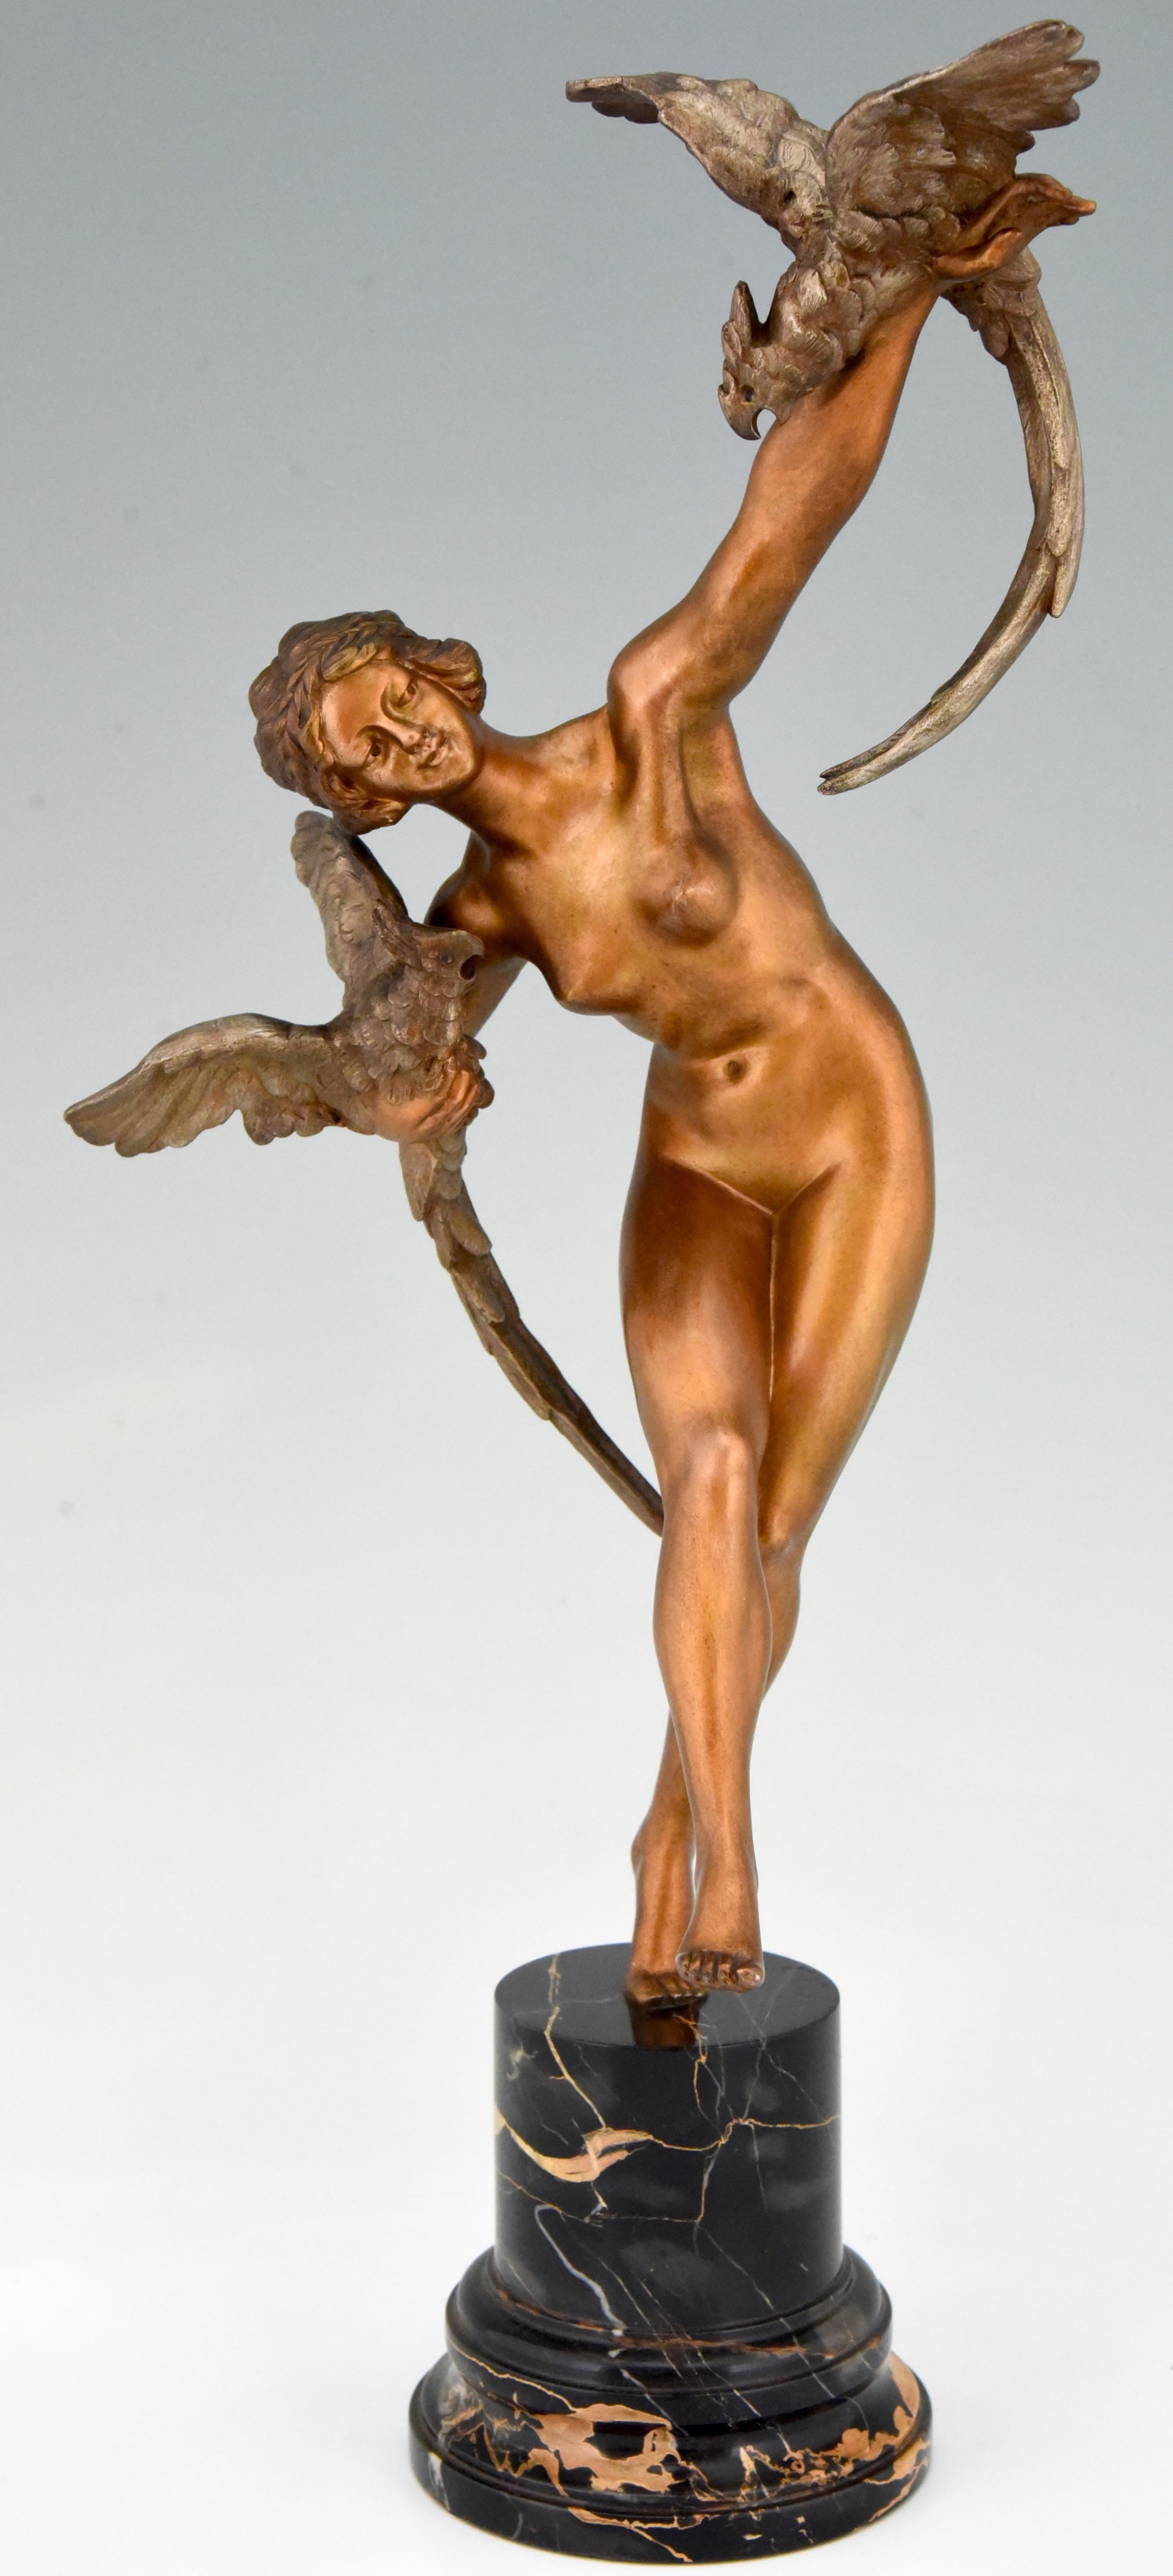 Tall Art Deco bronze sculpture nude dancer with parrots by Claire Jeanne Roberte Colinet.
The bronze has a golden patina and stands on a portor marble base, France, circa 1925.
With les neveux de Lehmann foundry seal. 
 
This model is